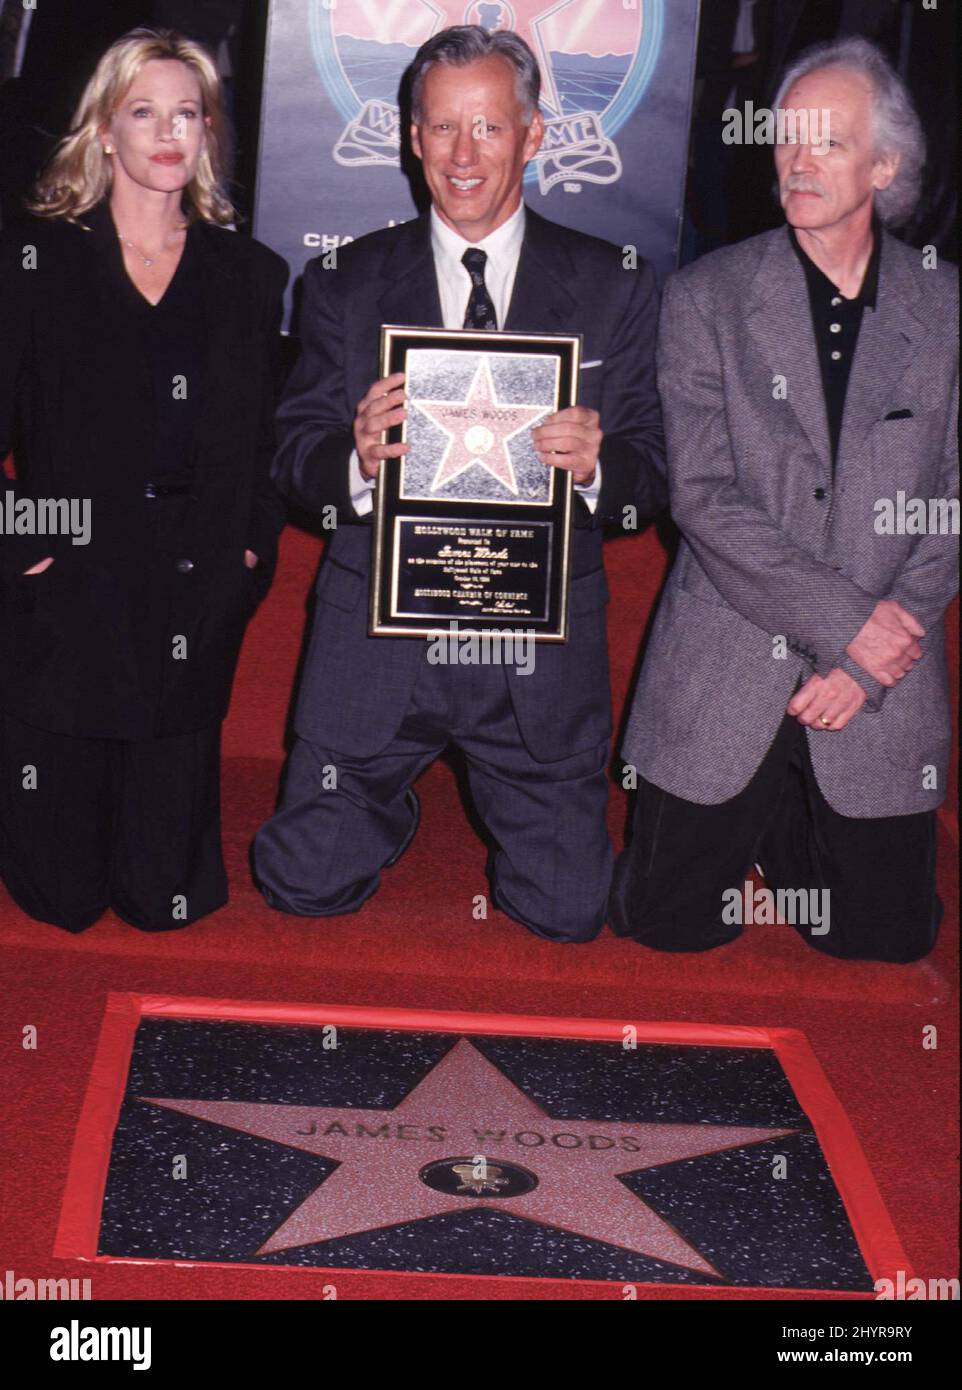 Melanie Griffith, James Woods and John Carpenter at his Hollywood Walk of Fame star ceremony on October 15, 1998 in Hollywood, CA. Stock Photo